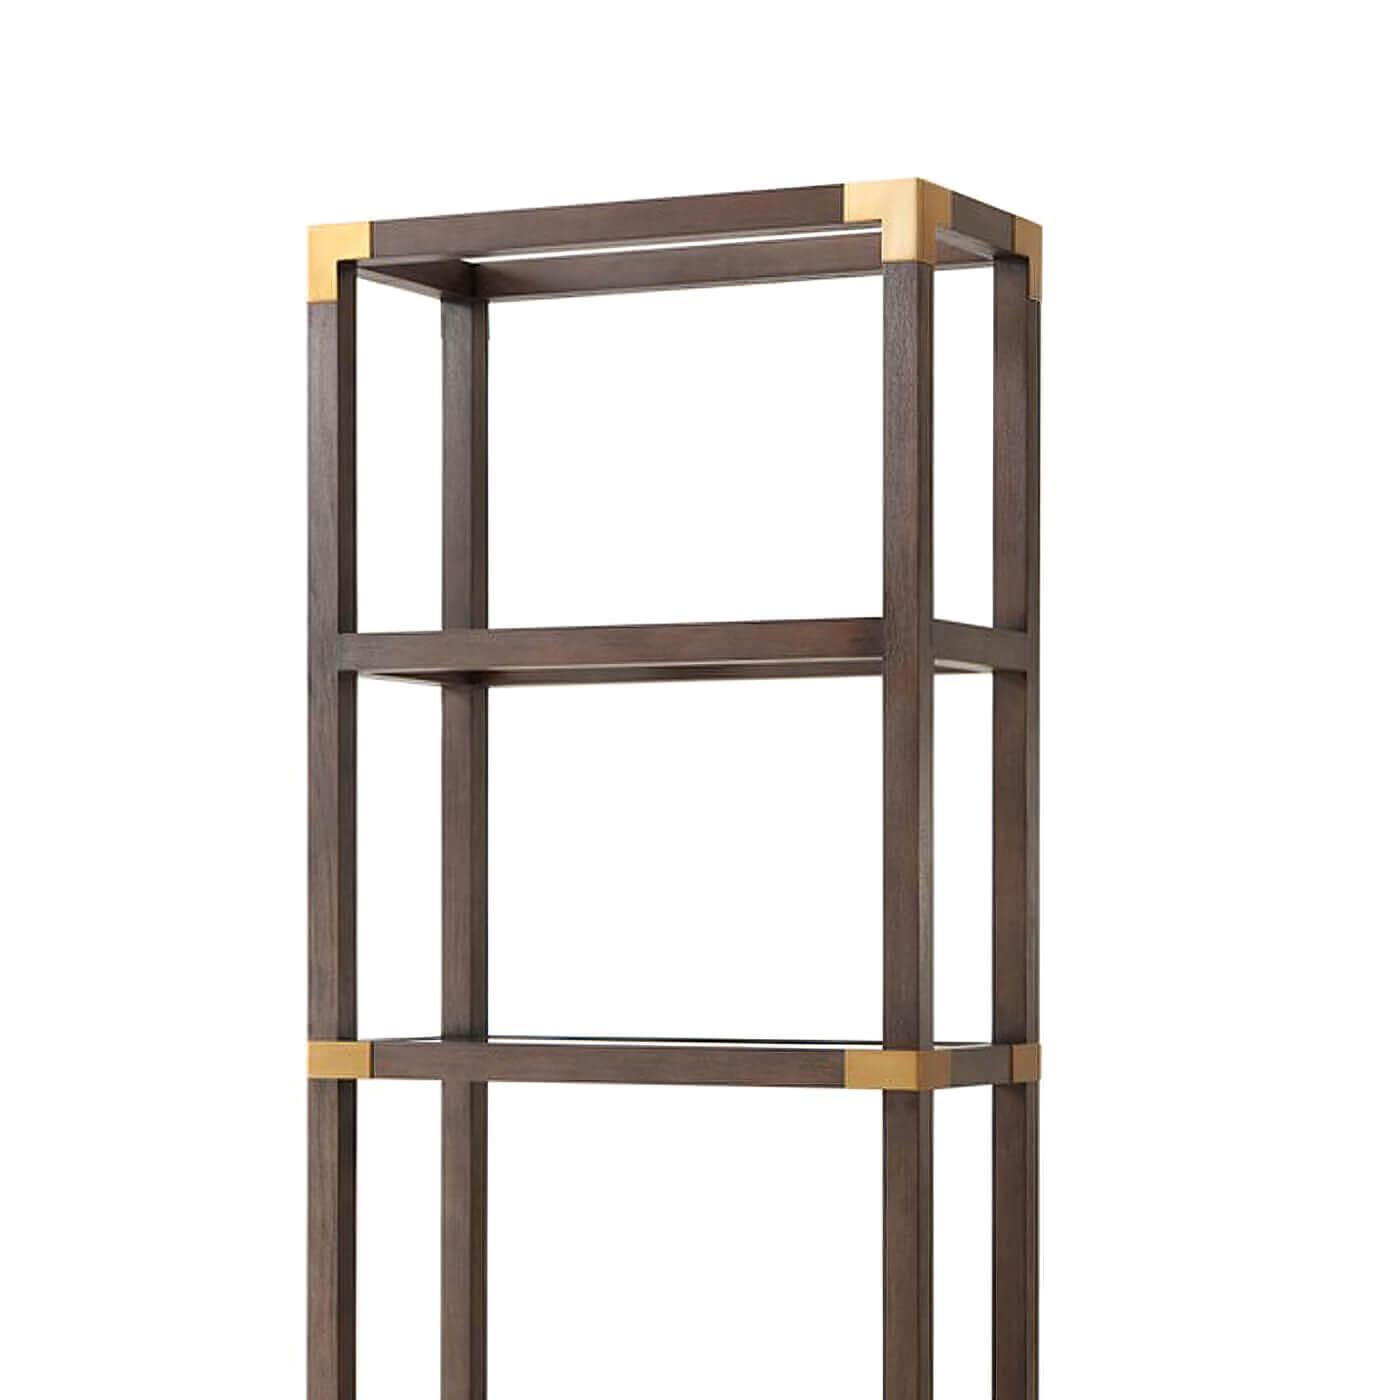 A campaign-style Beech etagere with glass inset shelves. This etagere is crafted of solid textured Beech with a cardamon finish and is accented with brushed brass-finished corners. 

Dimensions: 32